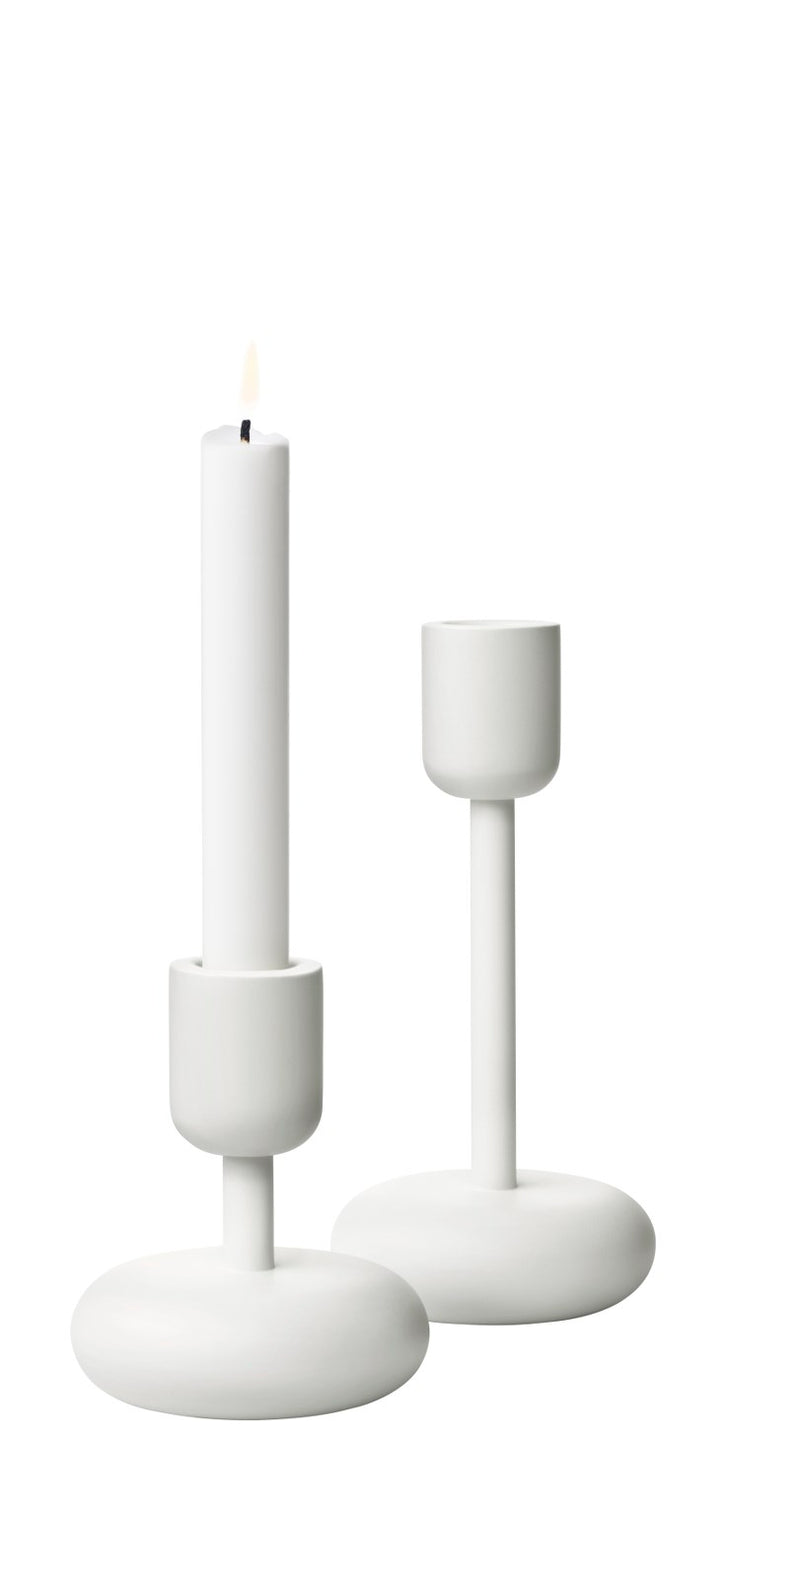 media image for Nappula Candleholder in Various Sizes & Colors design by Matti Klenell for Iittala 251